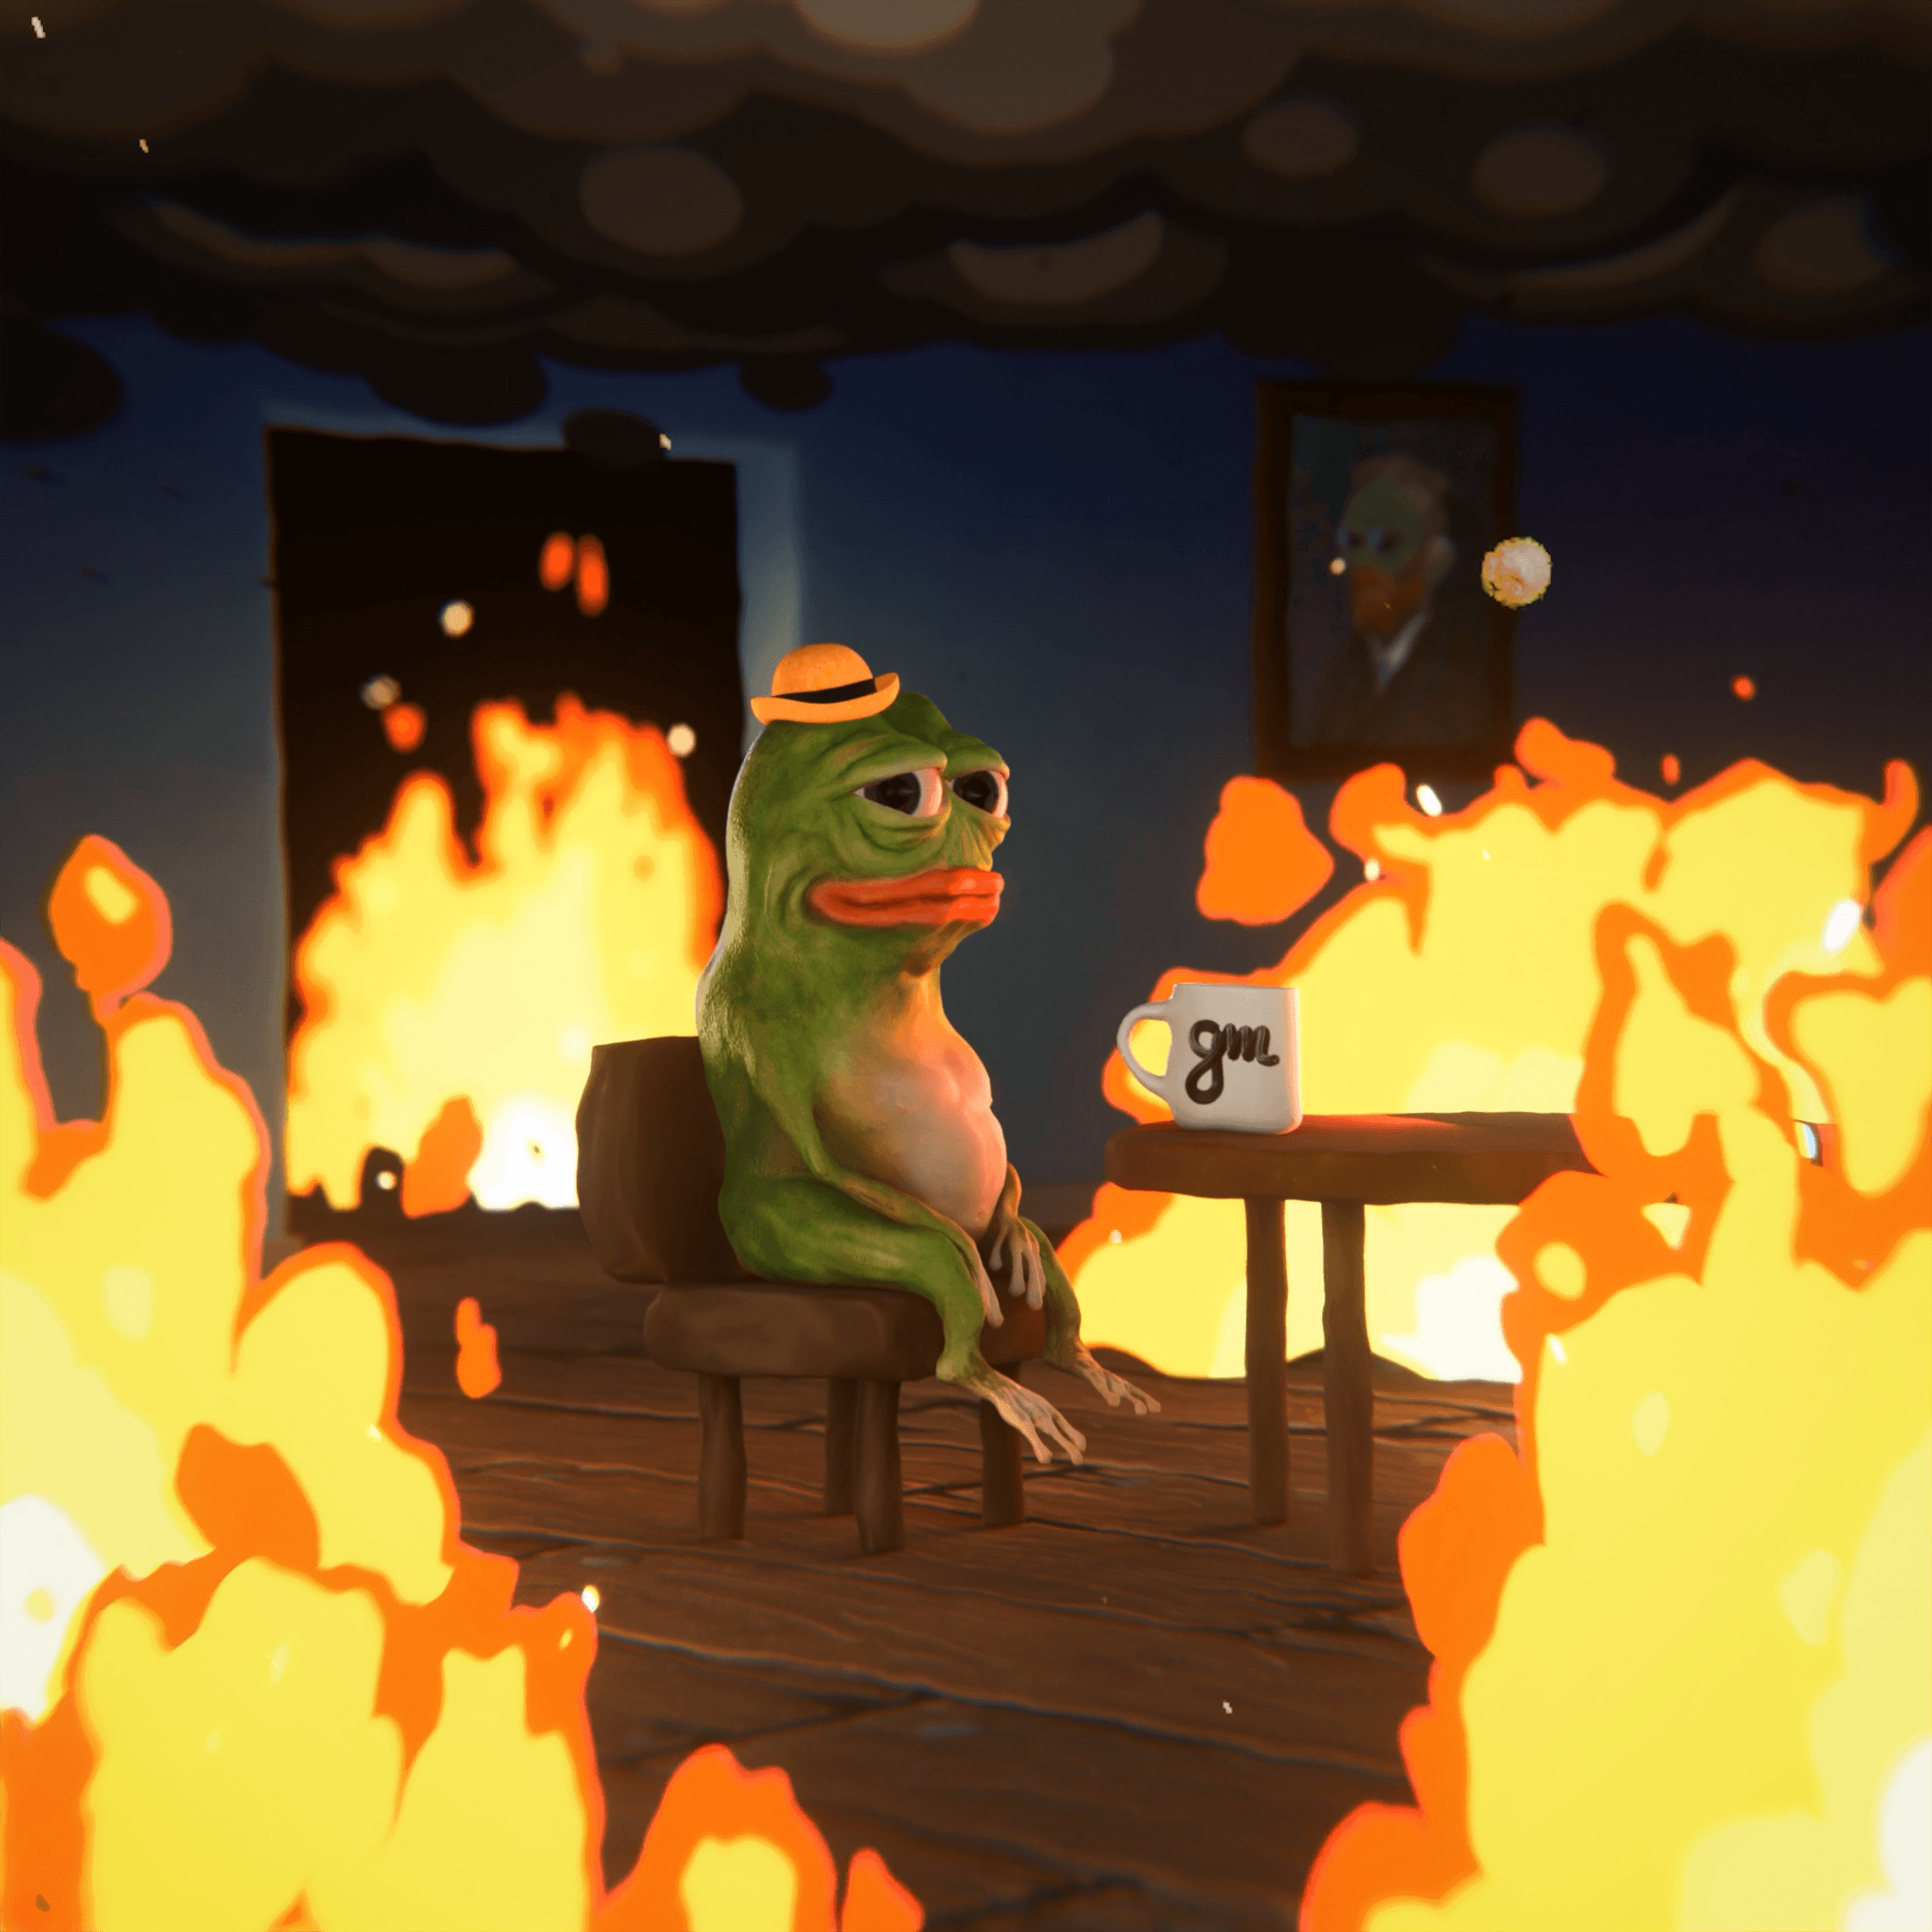 This is fine 🐸